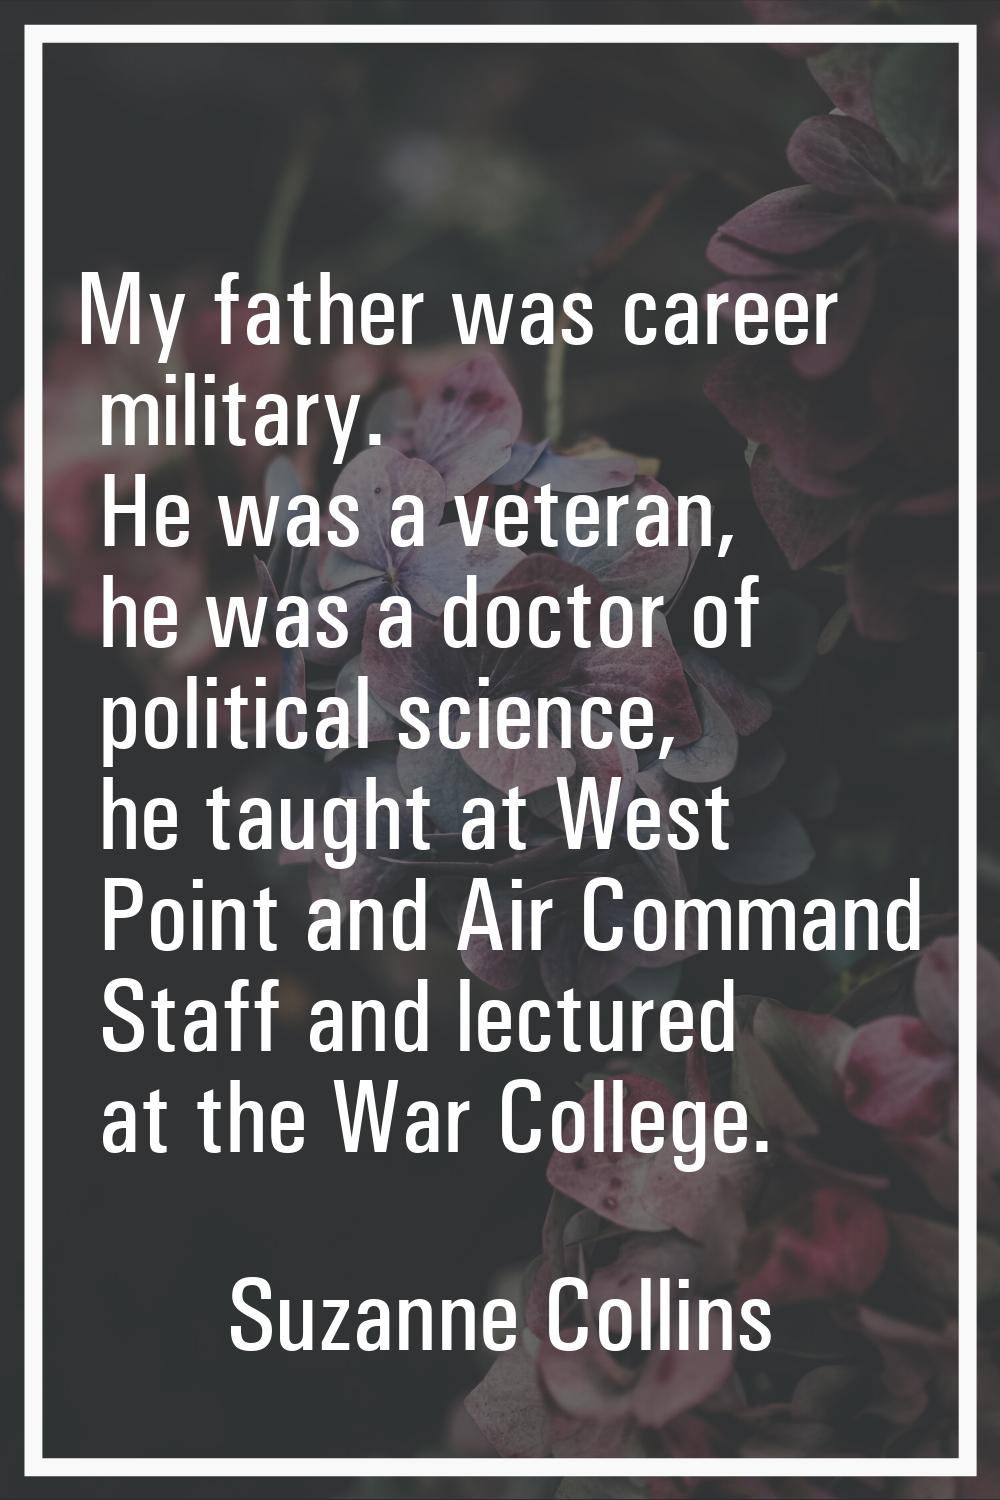 My father was career military. He was a veteran, he was a doctor of political science, he taught at